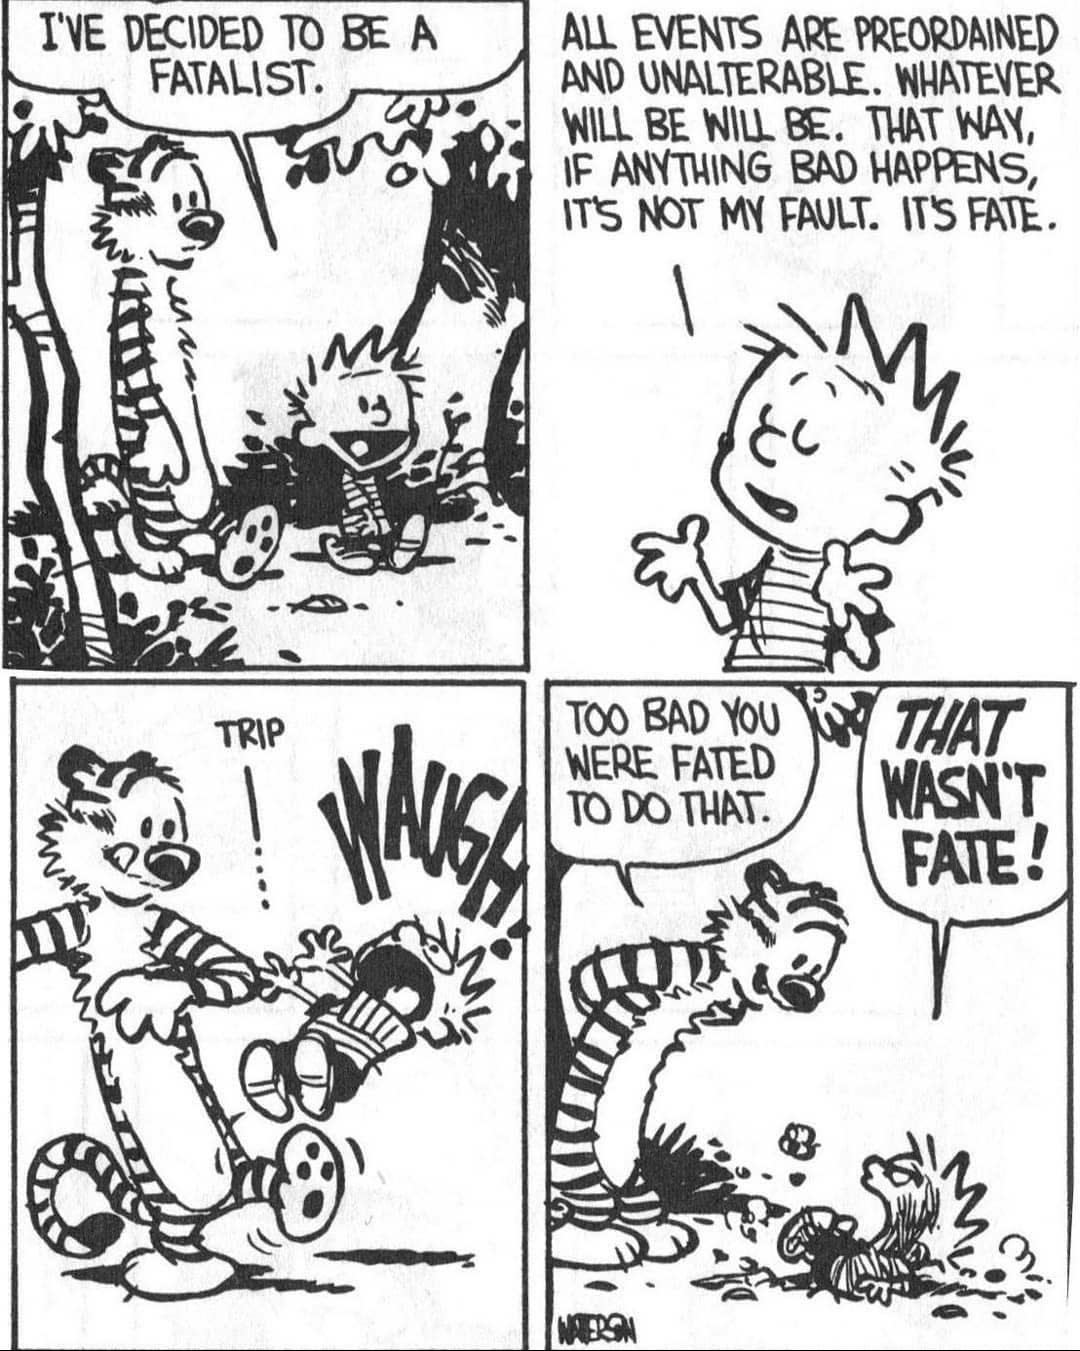 Why do you need a teacher when you have Hobbes?